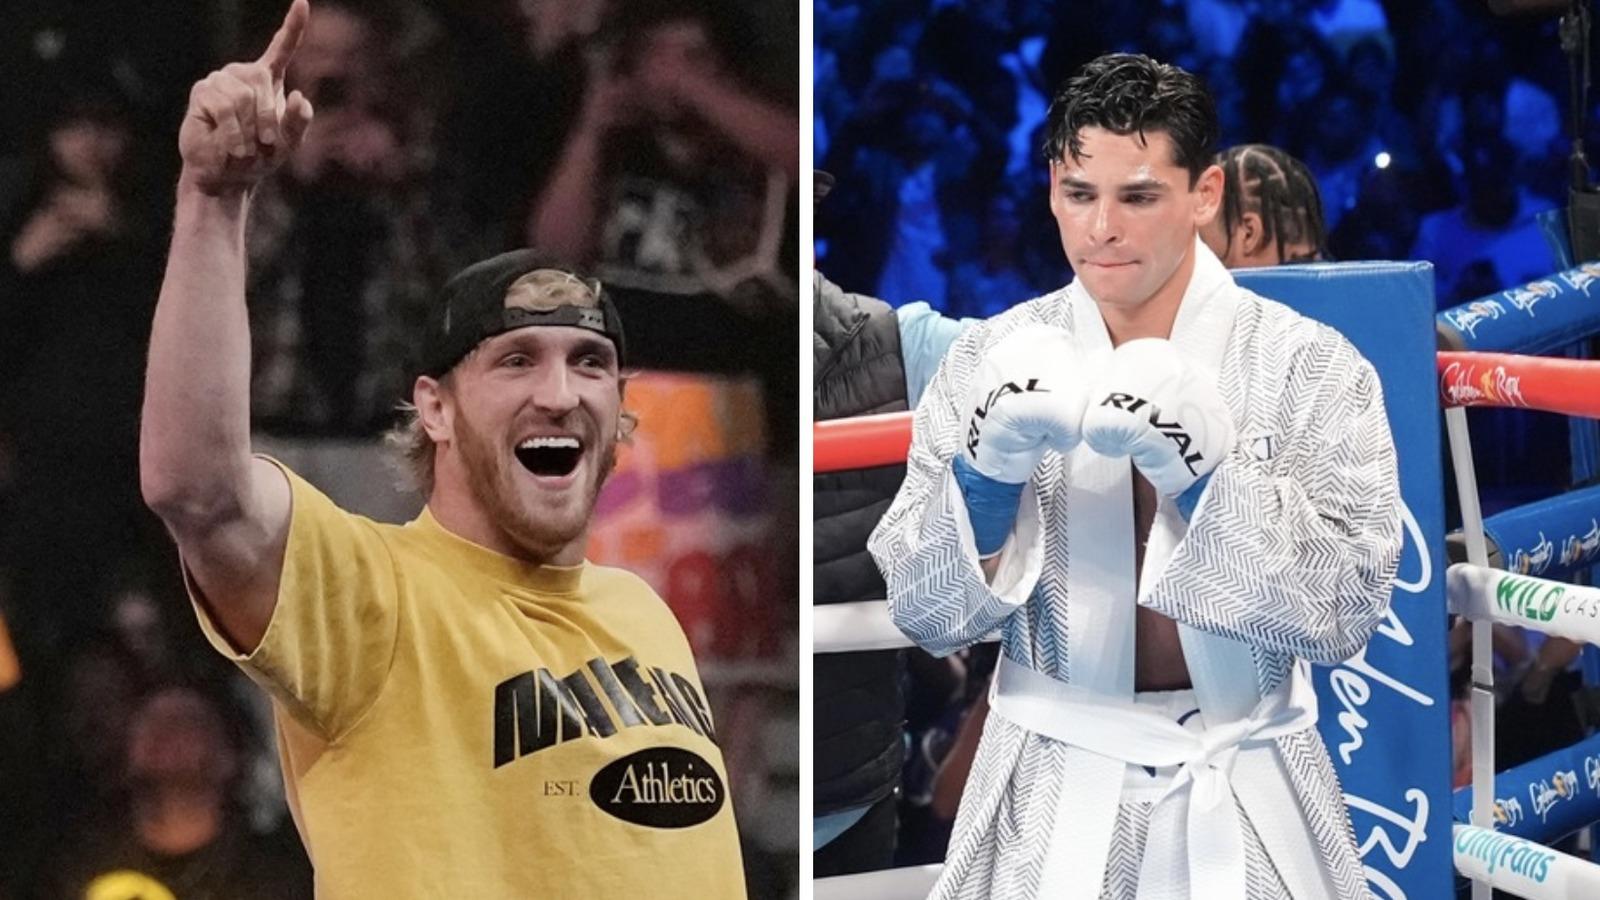 After confirmation of a failed PED test by Ryan Garcia, his long-time rival Logan Paul sent shots at the boxing star